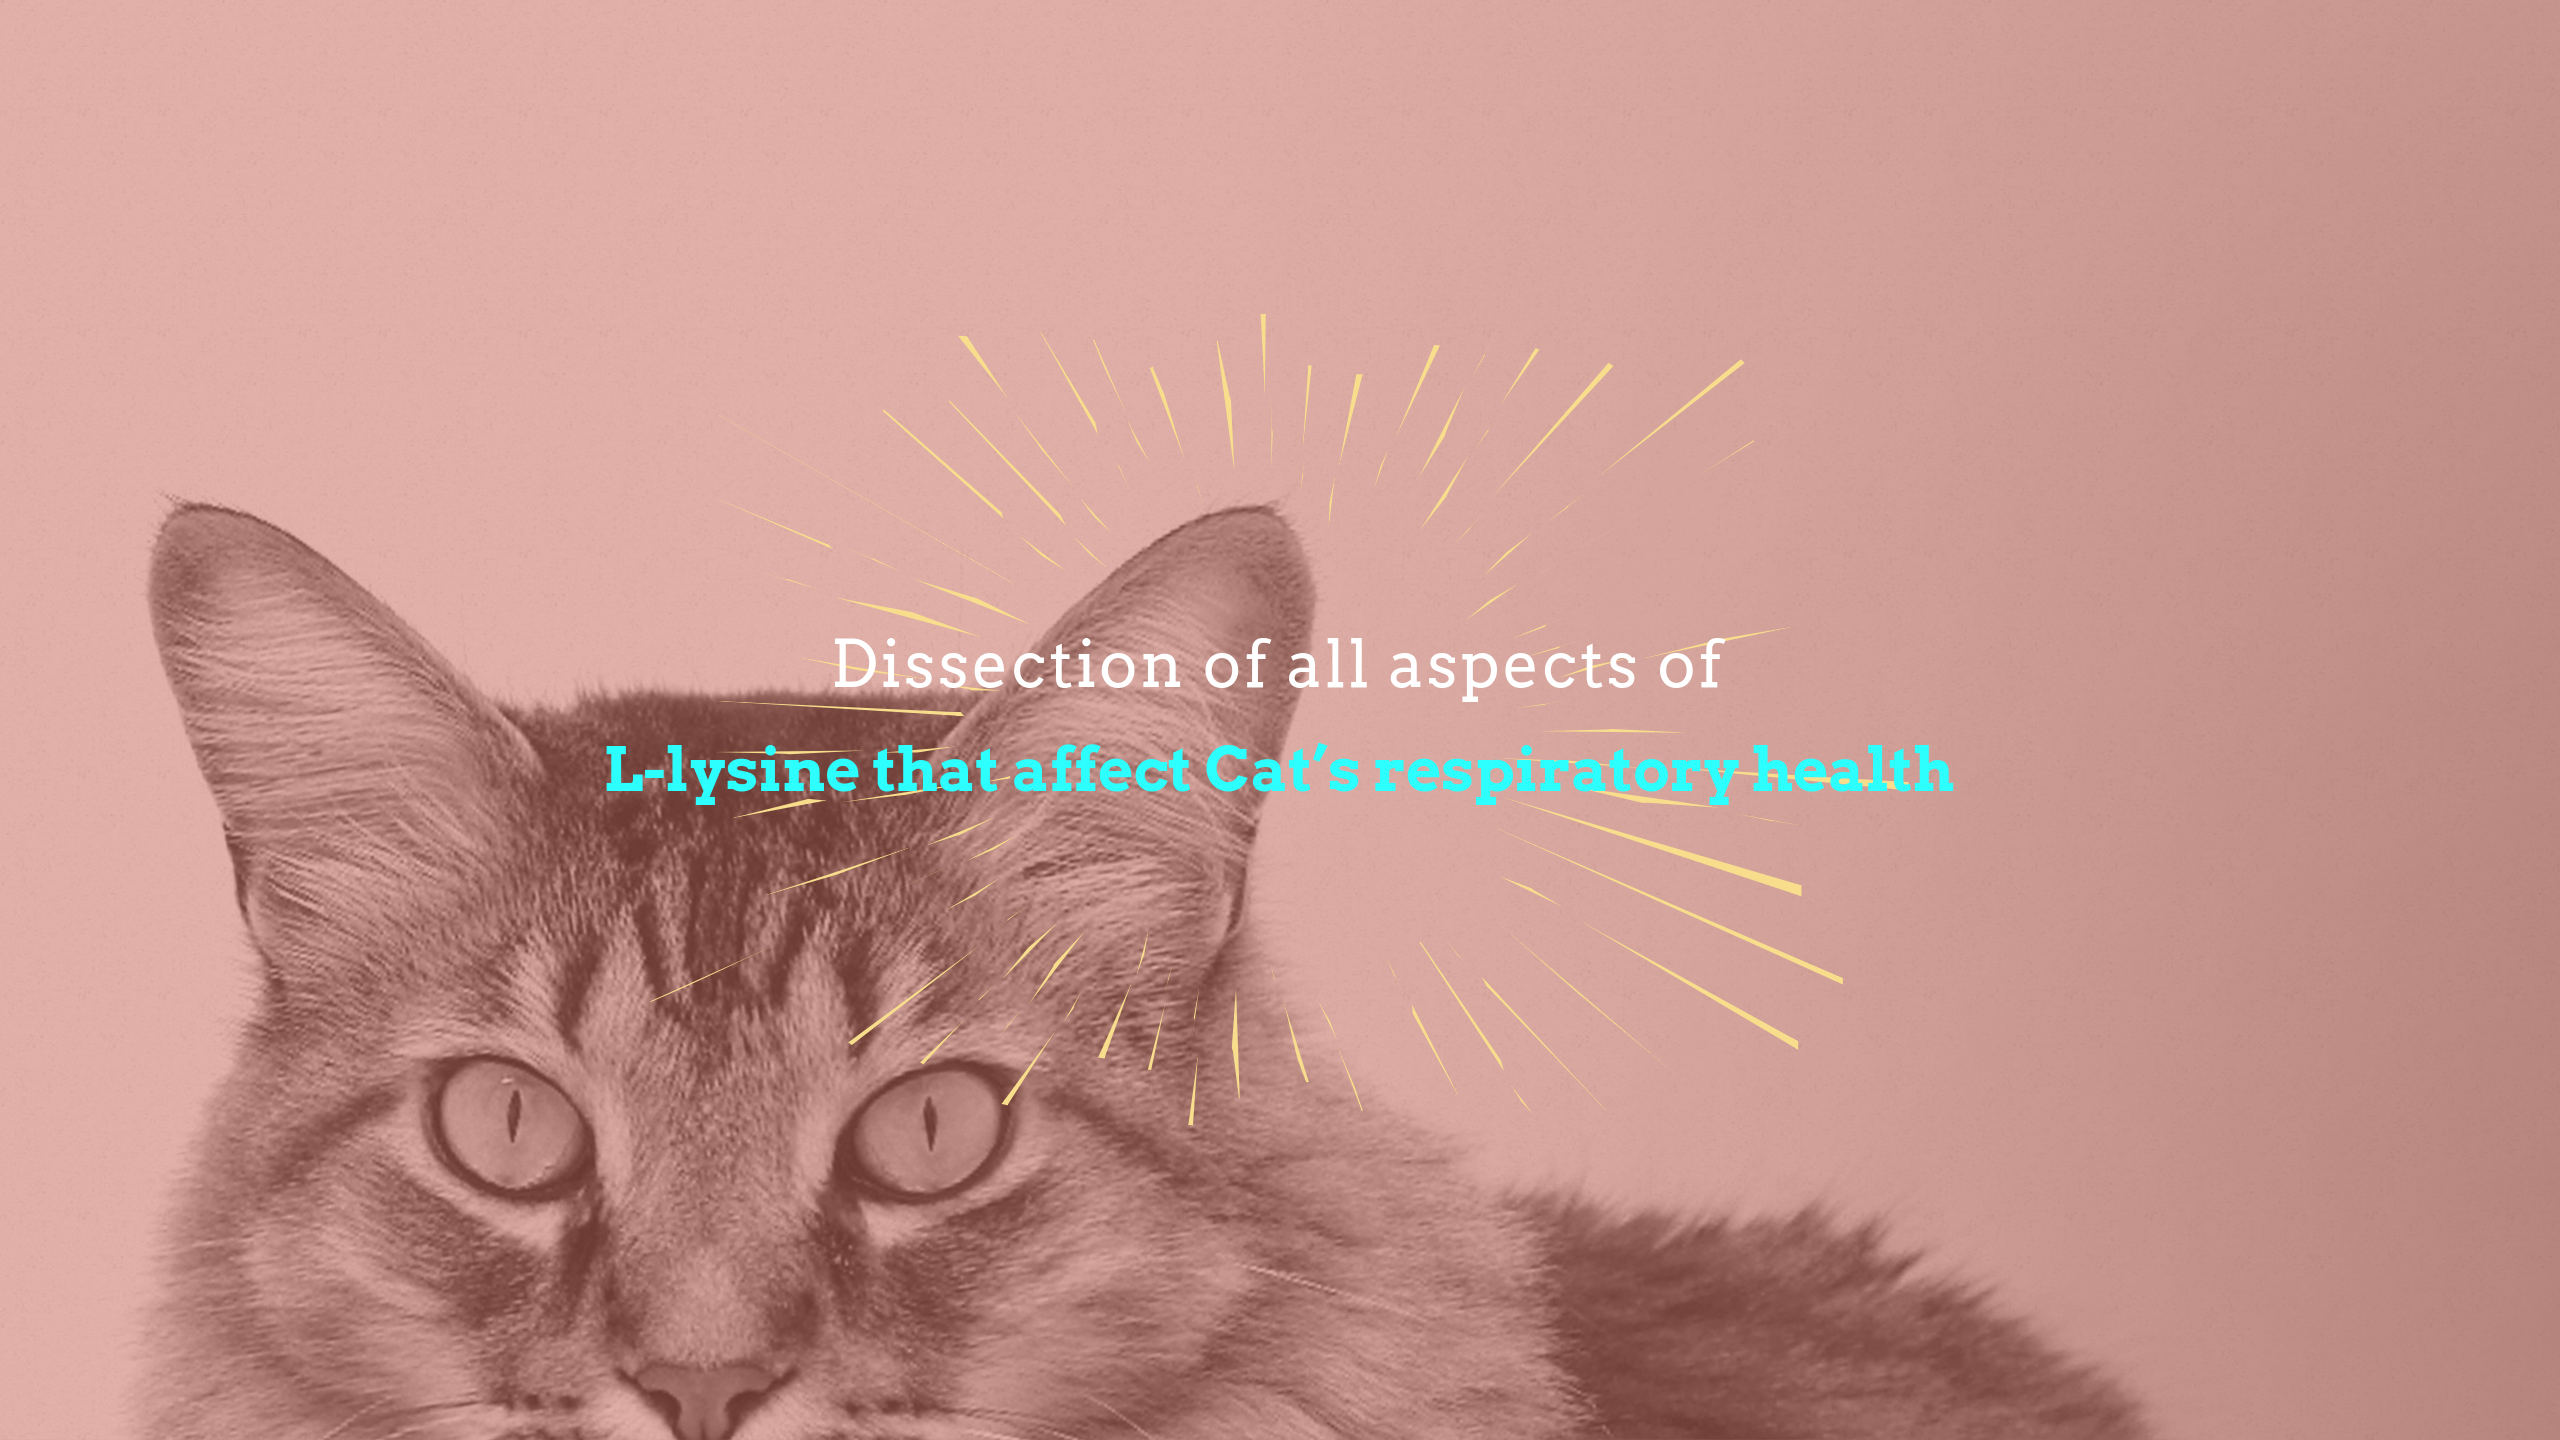 Dissection of all aspects of L-lysine that directly affect Cat’s respiratory health